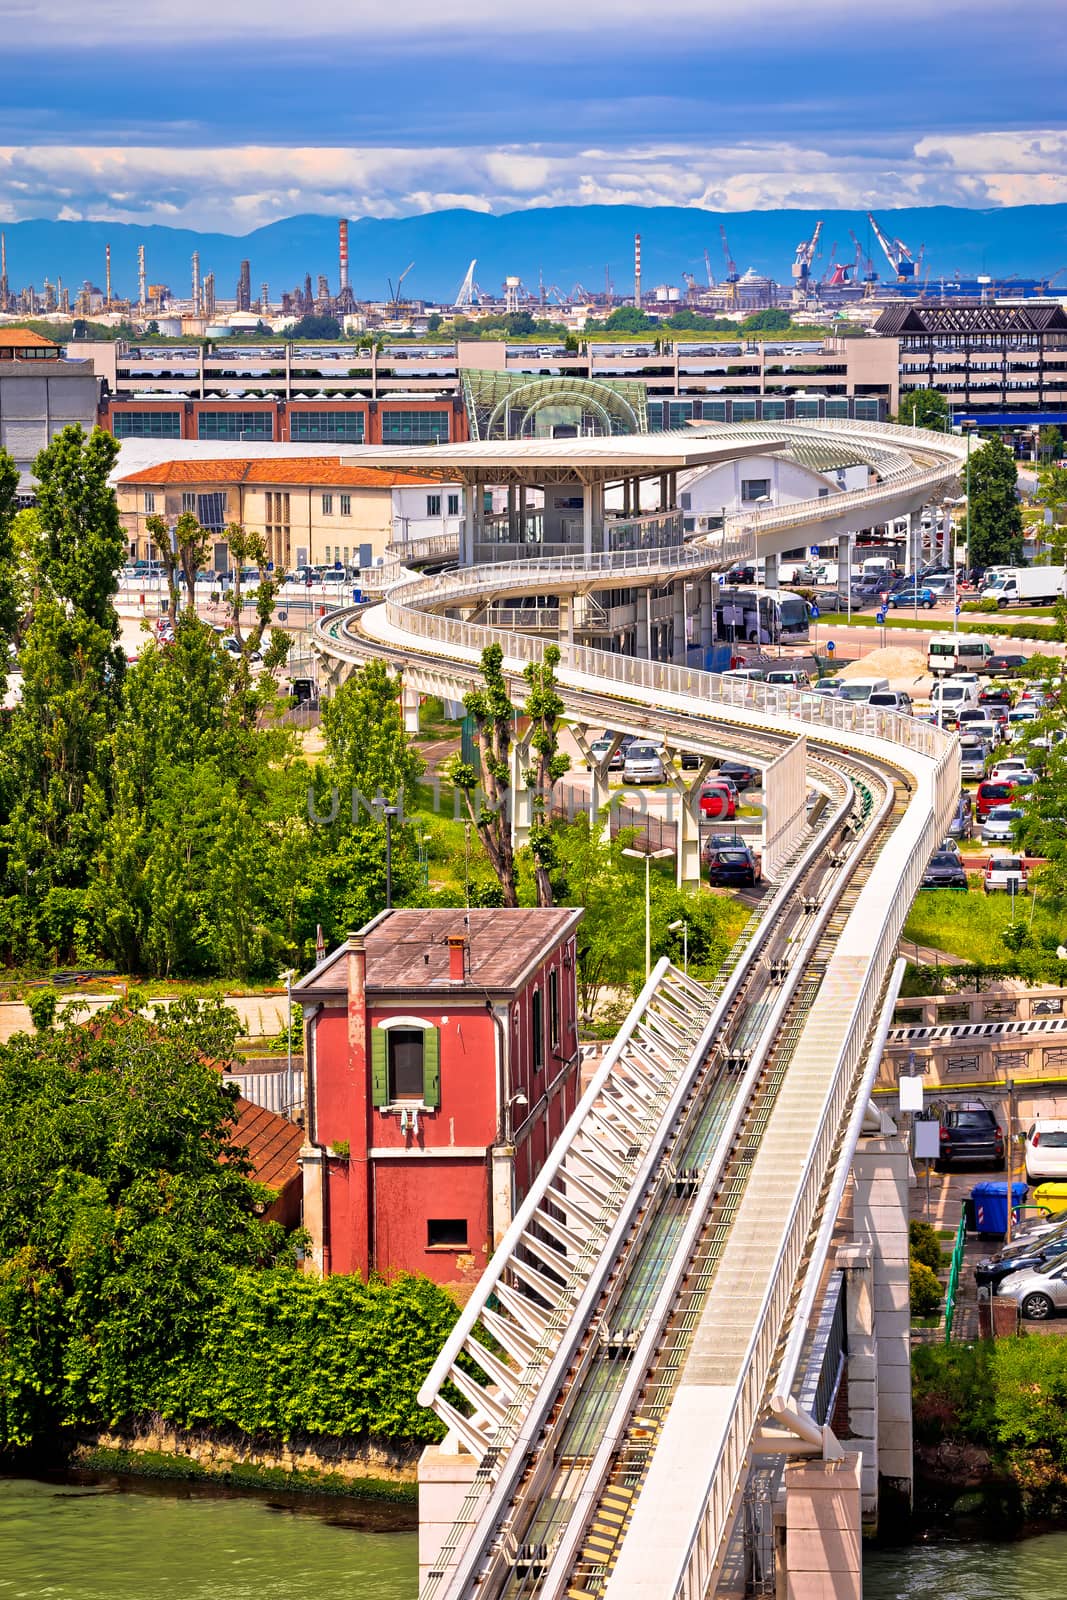 Venice People Mover air rail transit system view by xbrchx